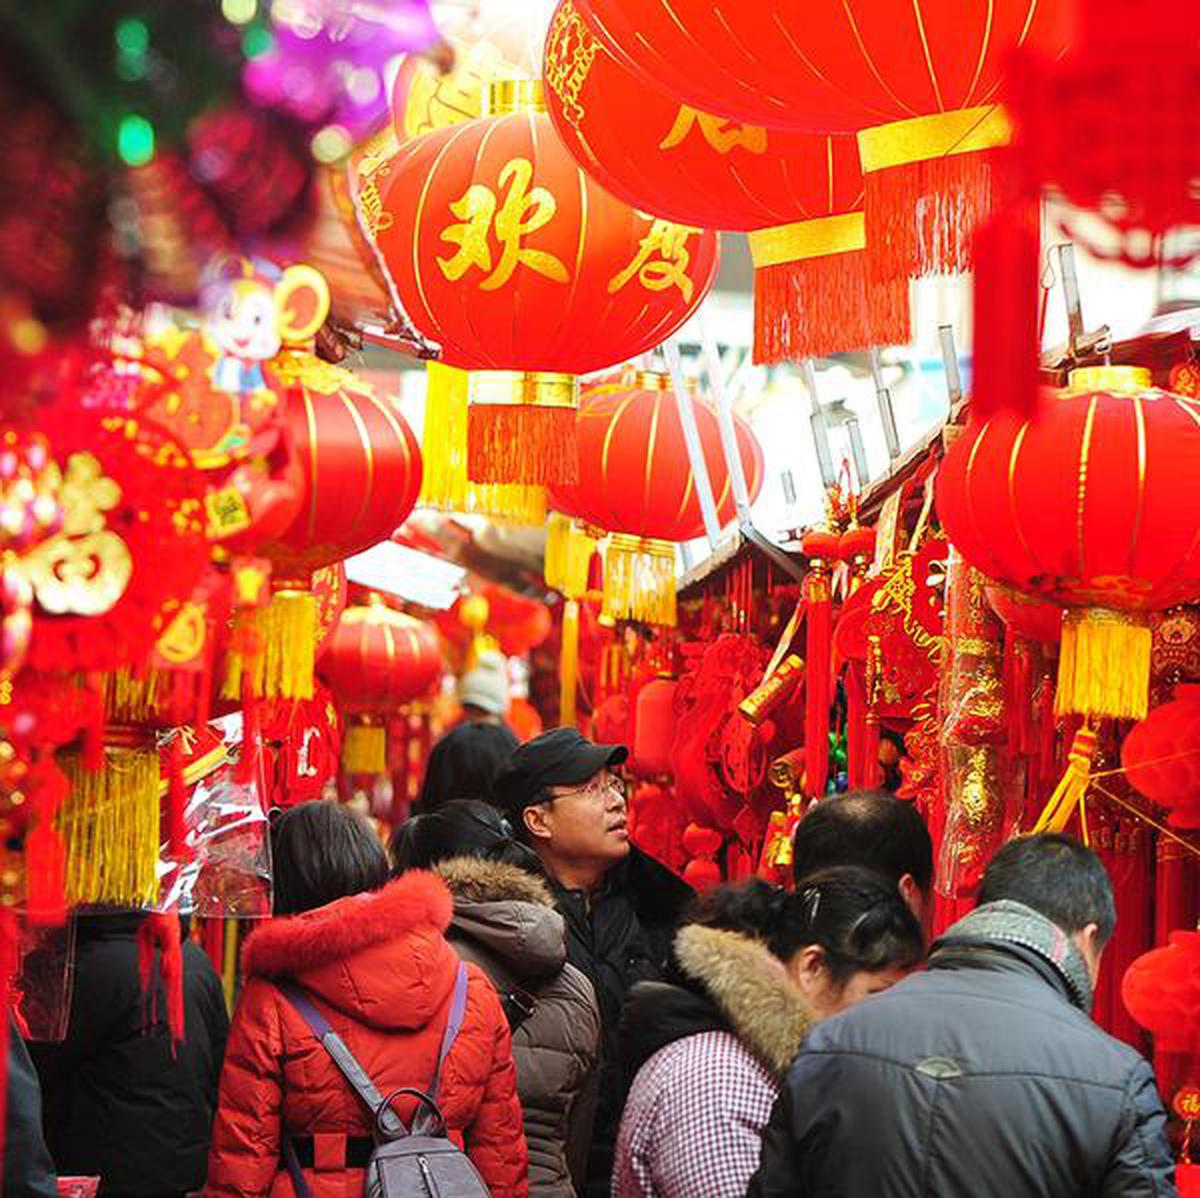 People buy decorations for the Lunar New Year at a market in Qingdao in China's eastern Shandong province on January 3, 2020.